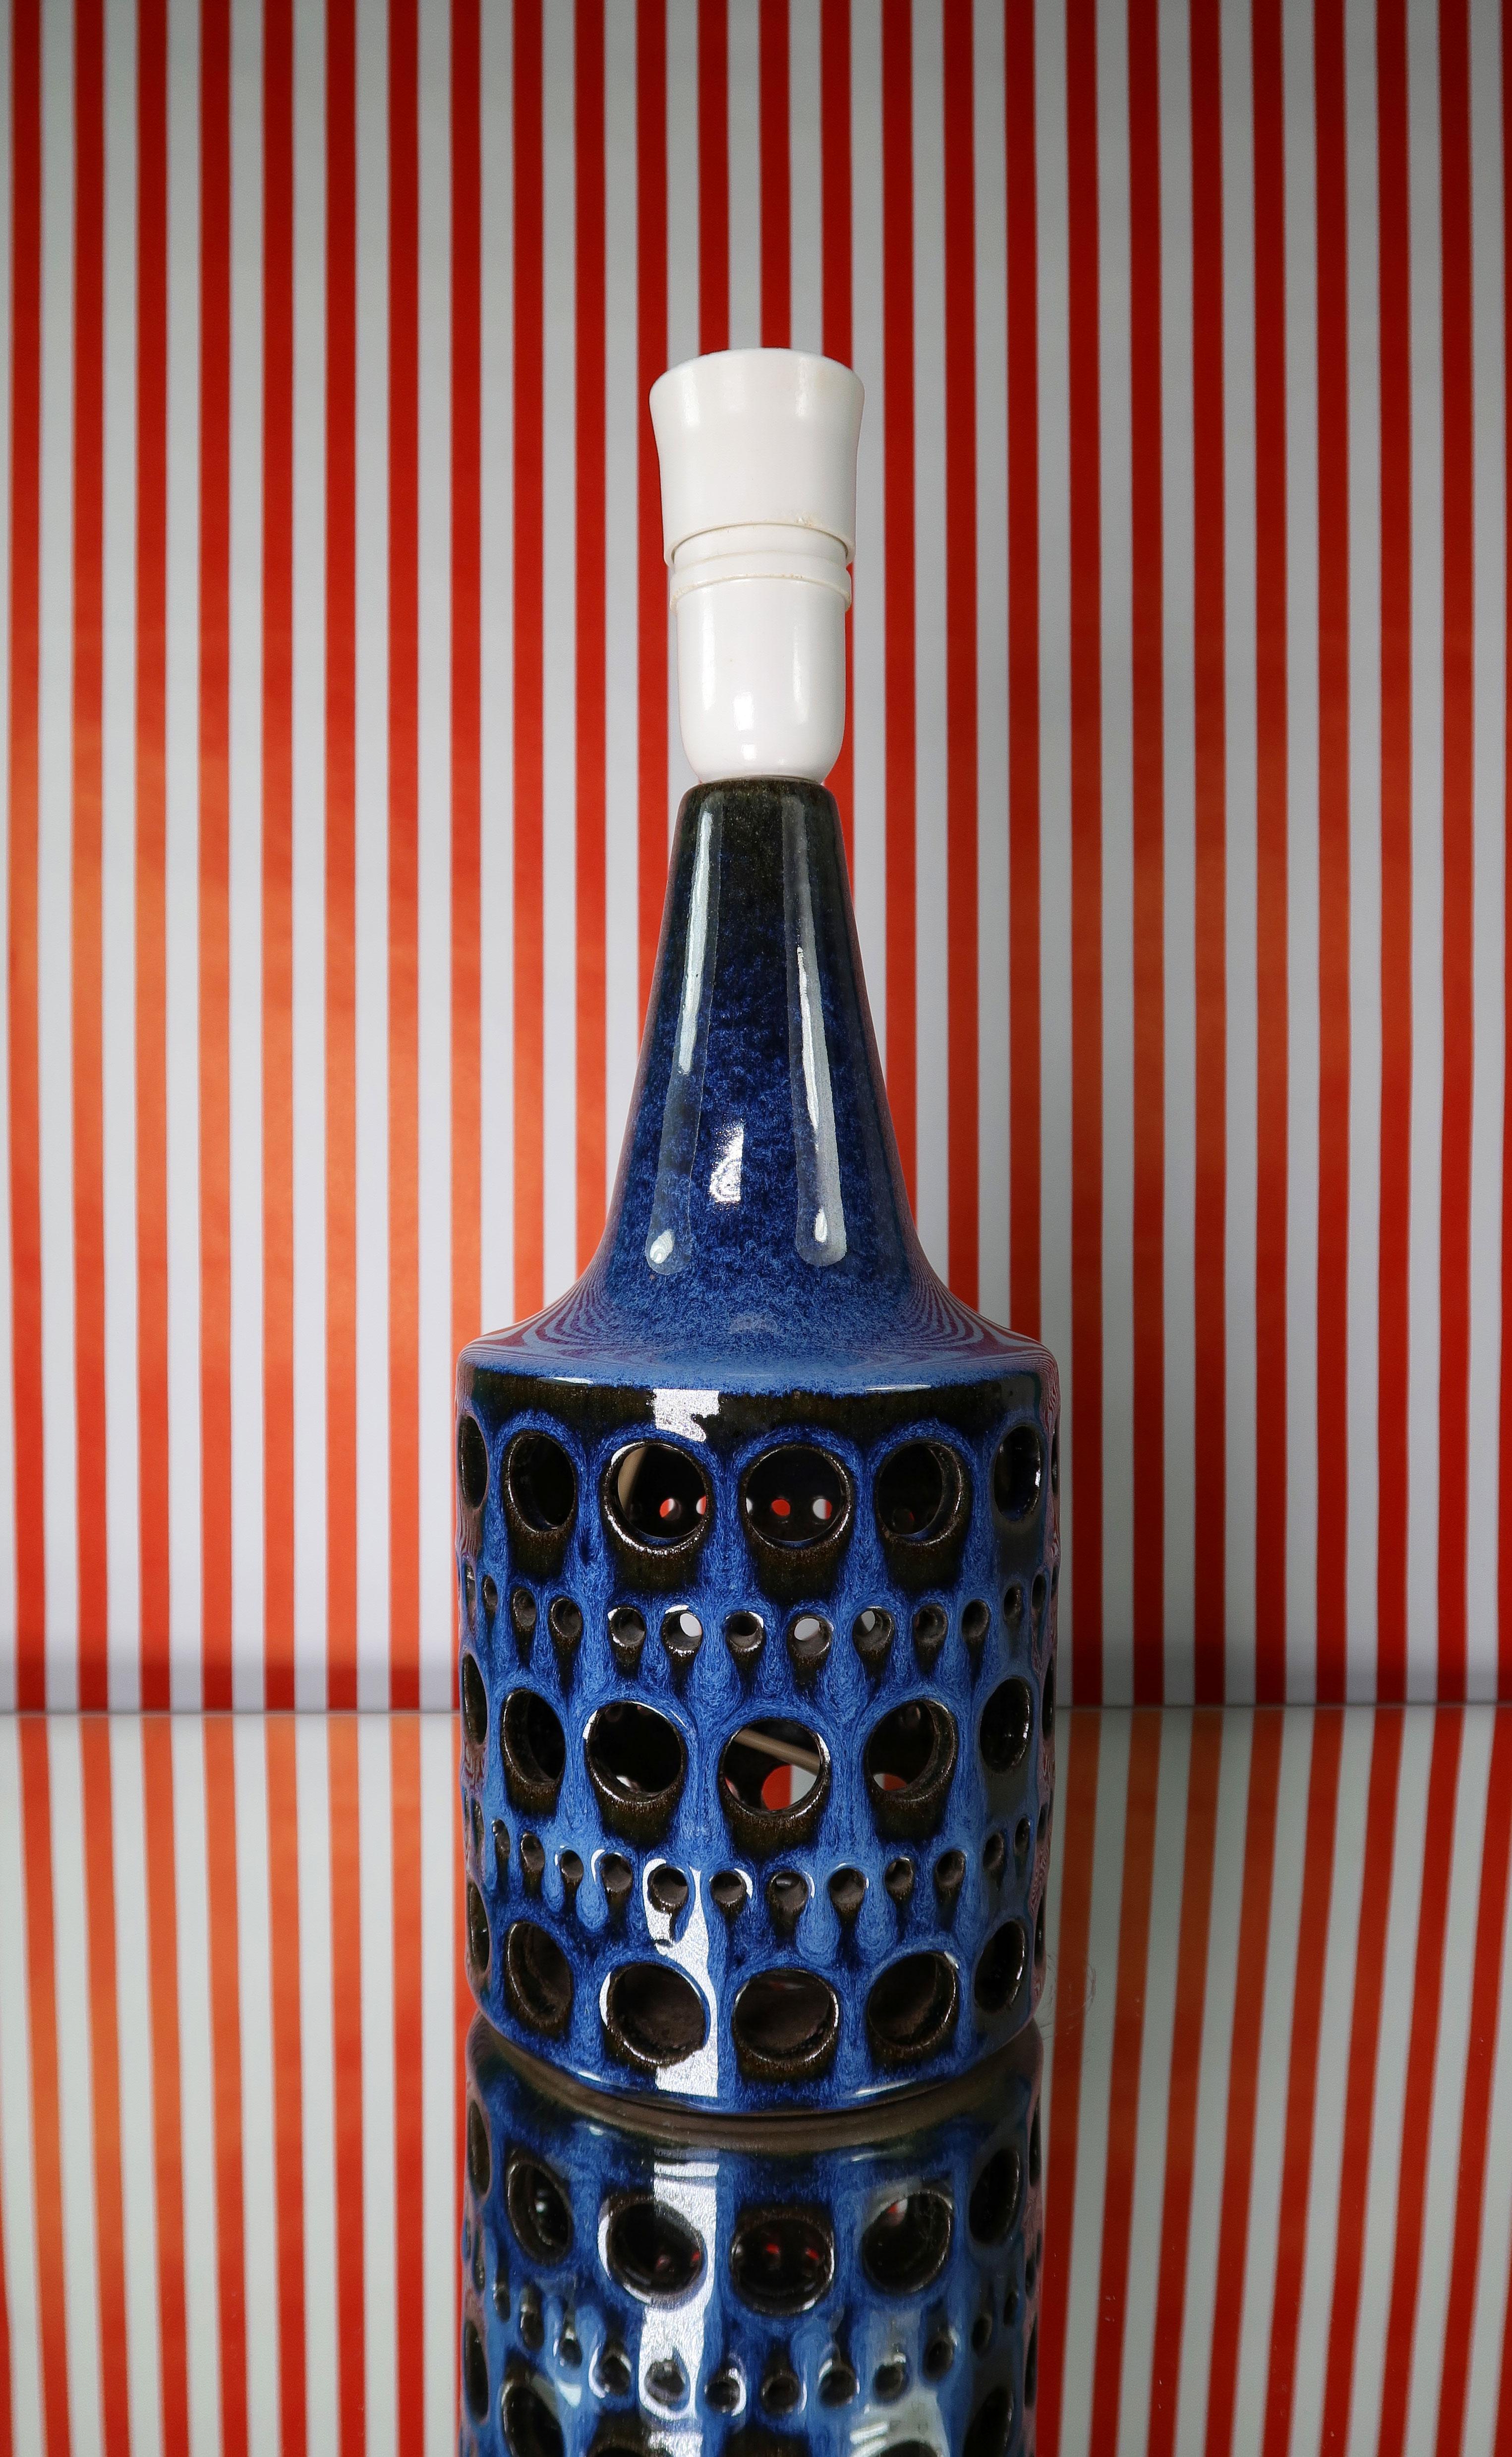 Extraordinary Danish Mid-Century Modern handmade ceramic table lamp by Marianne Starck for Michael Andersen & Son in the 1960s. Shiny indigo blue, light blue and black running glaze with geometric pattern of circle shaped perforations in two